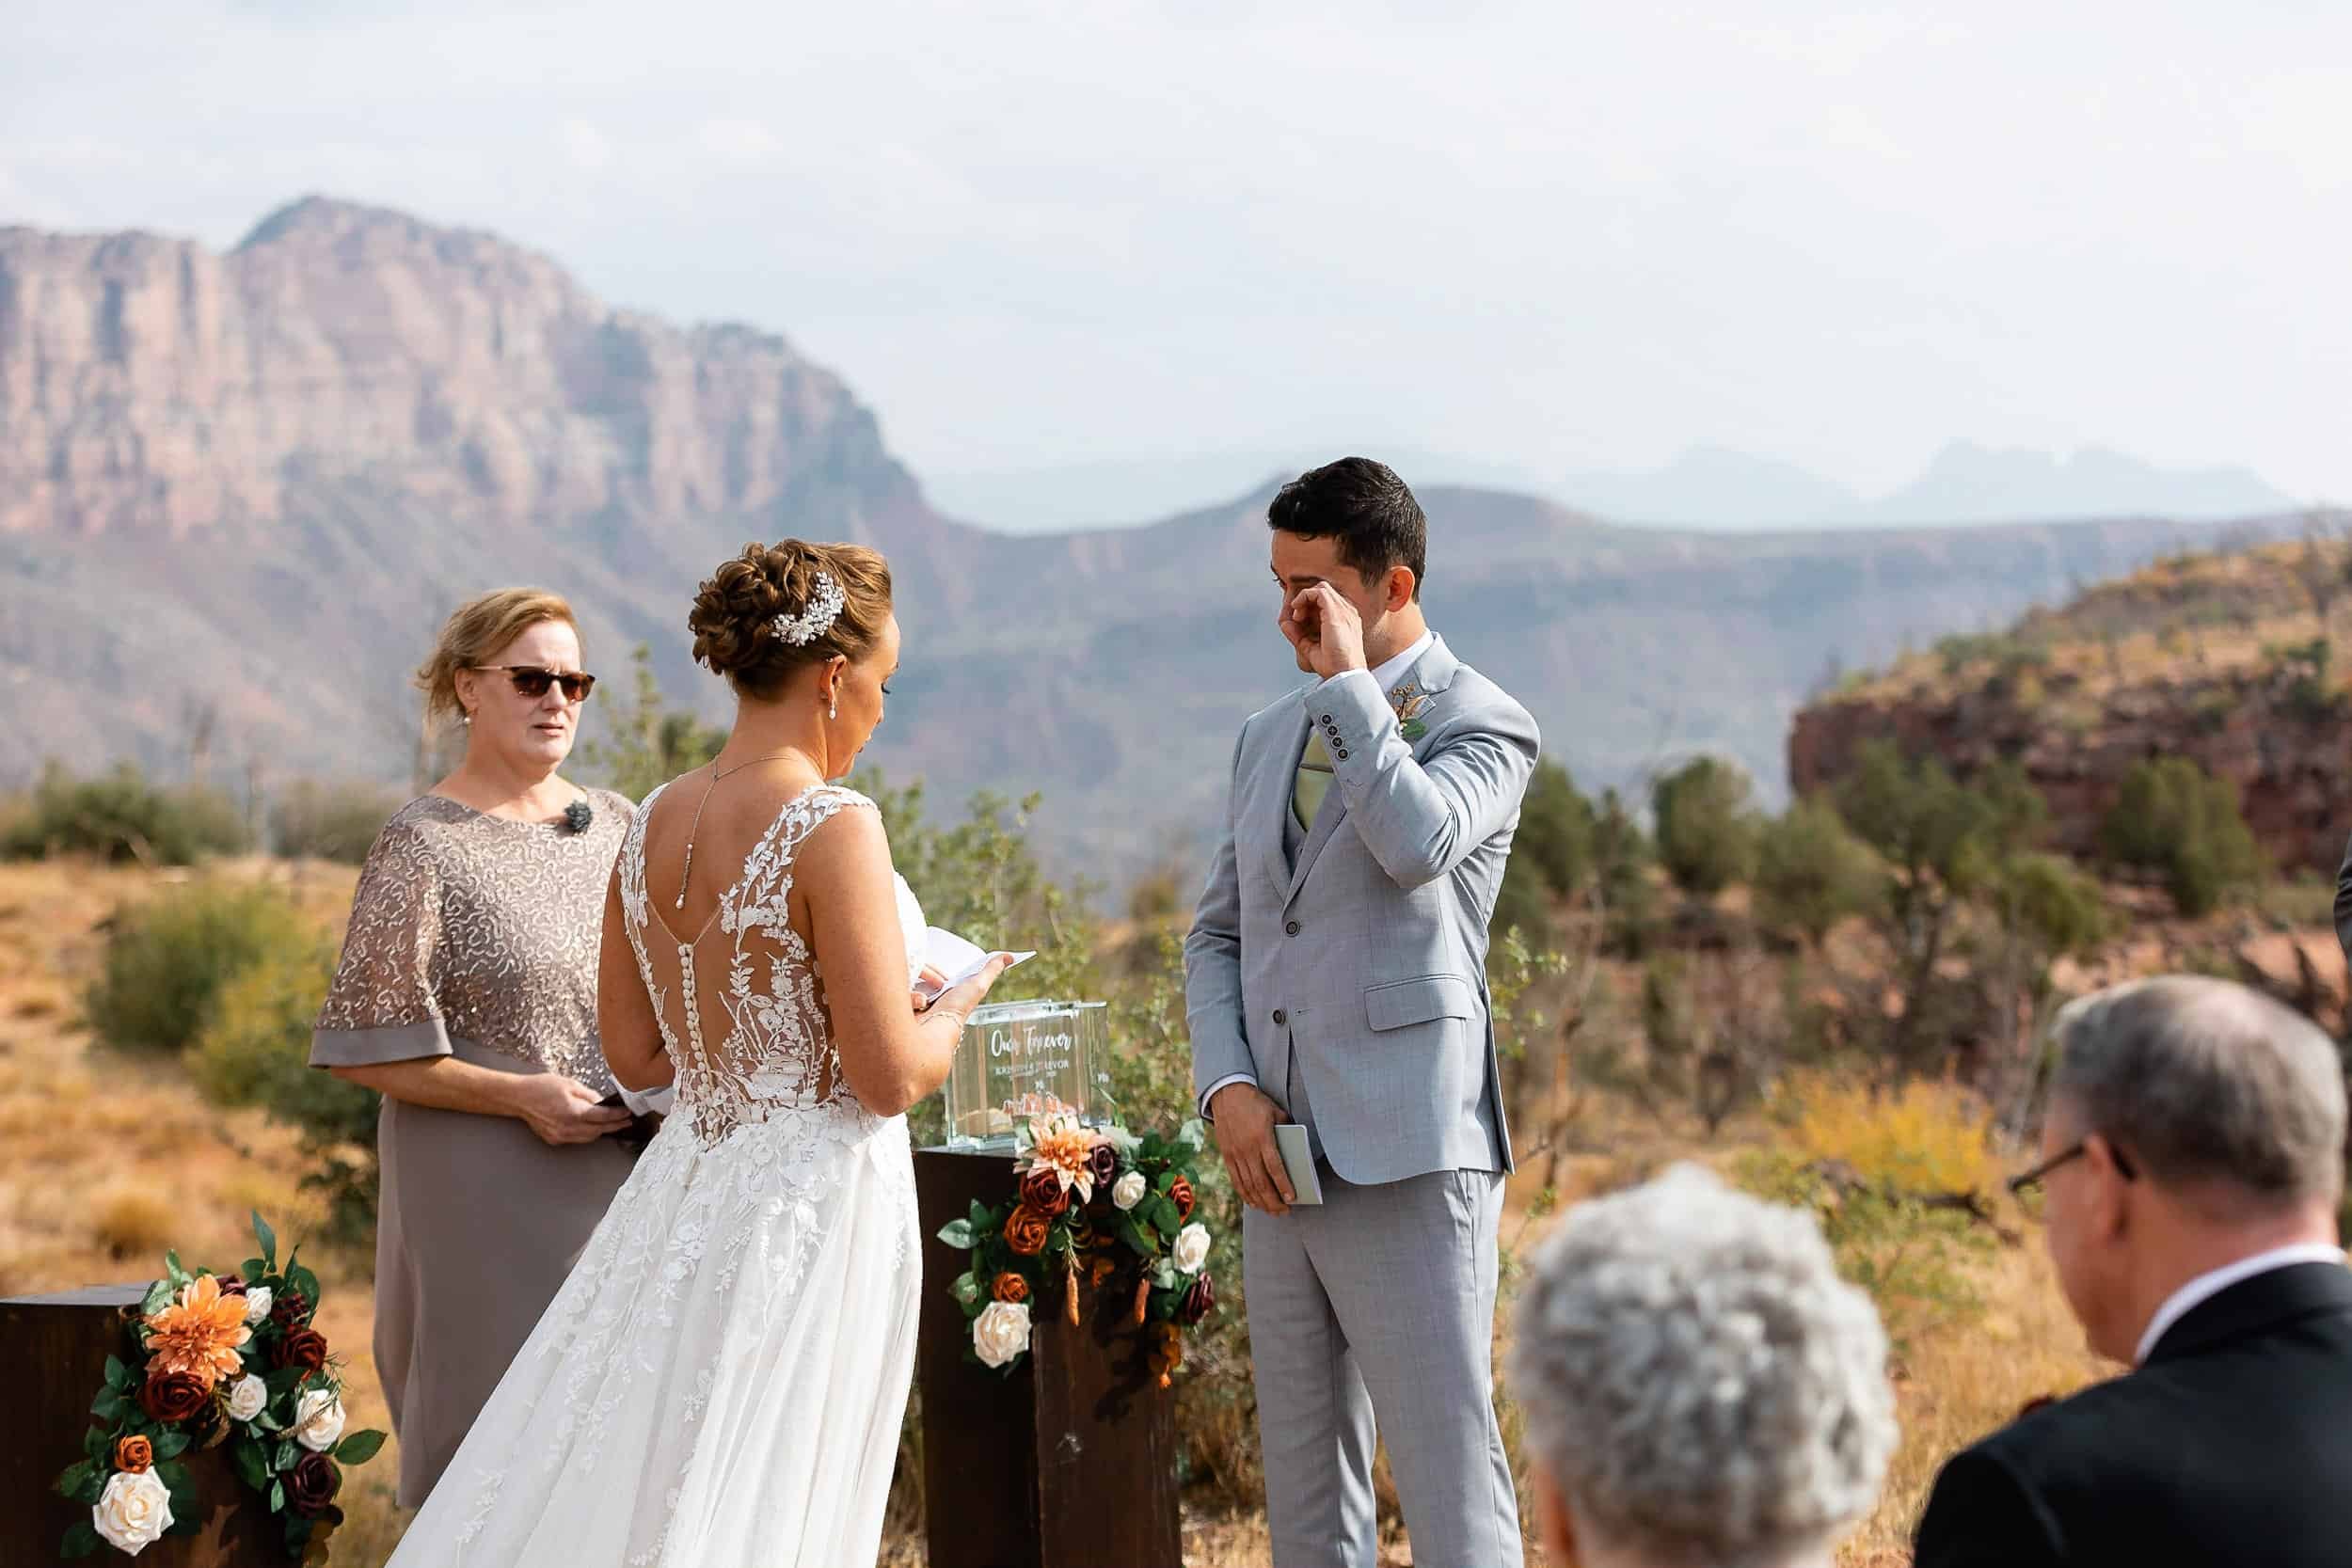 Groom wipes a tear from his eye while bride shares her vows during their Zion National Park elopement